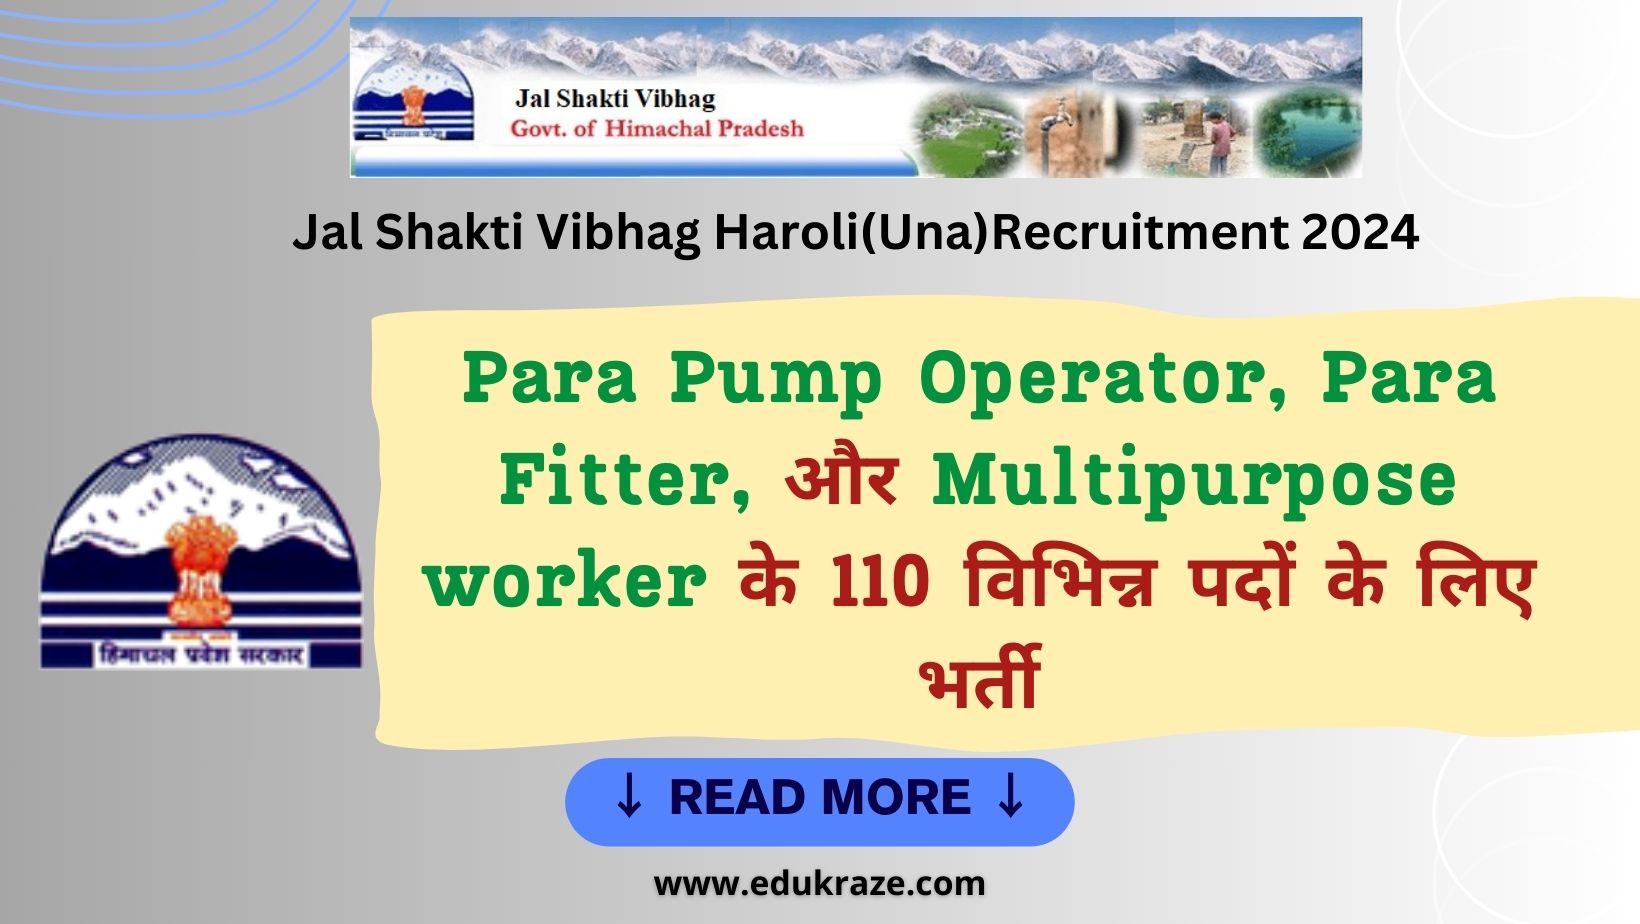 You are currently viewing Para Pump Operator, Para Fitter, and Multipurpose worker | 110 Posts | HP Jal Shakti Vibhag Division Haroli (Una) Recruitment 2024